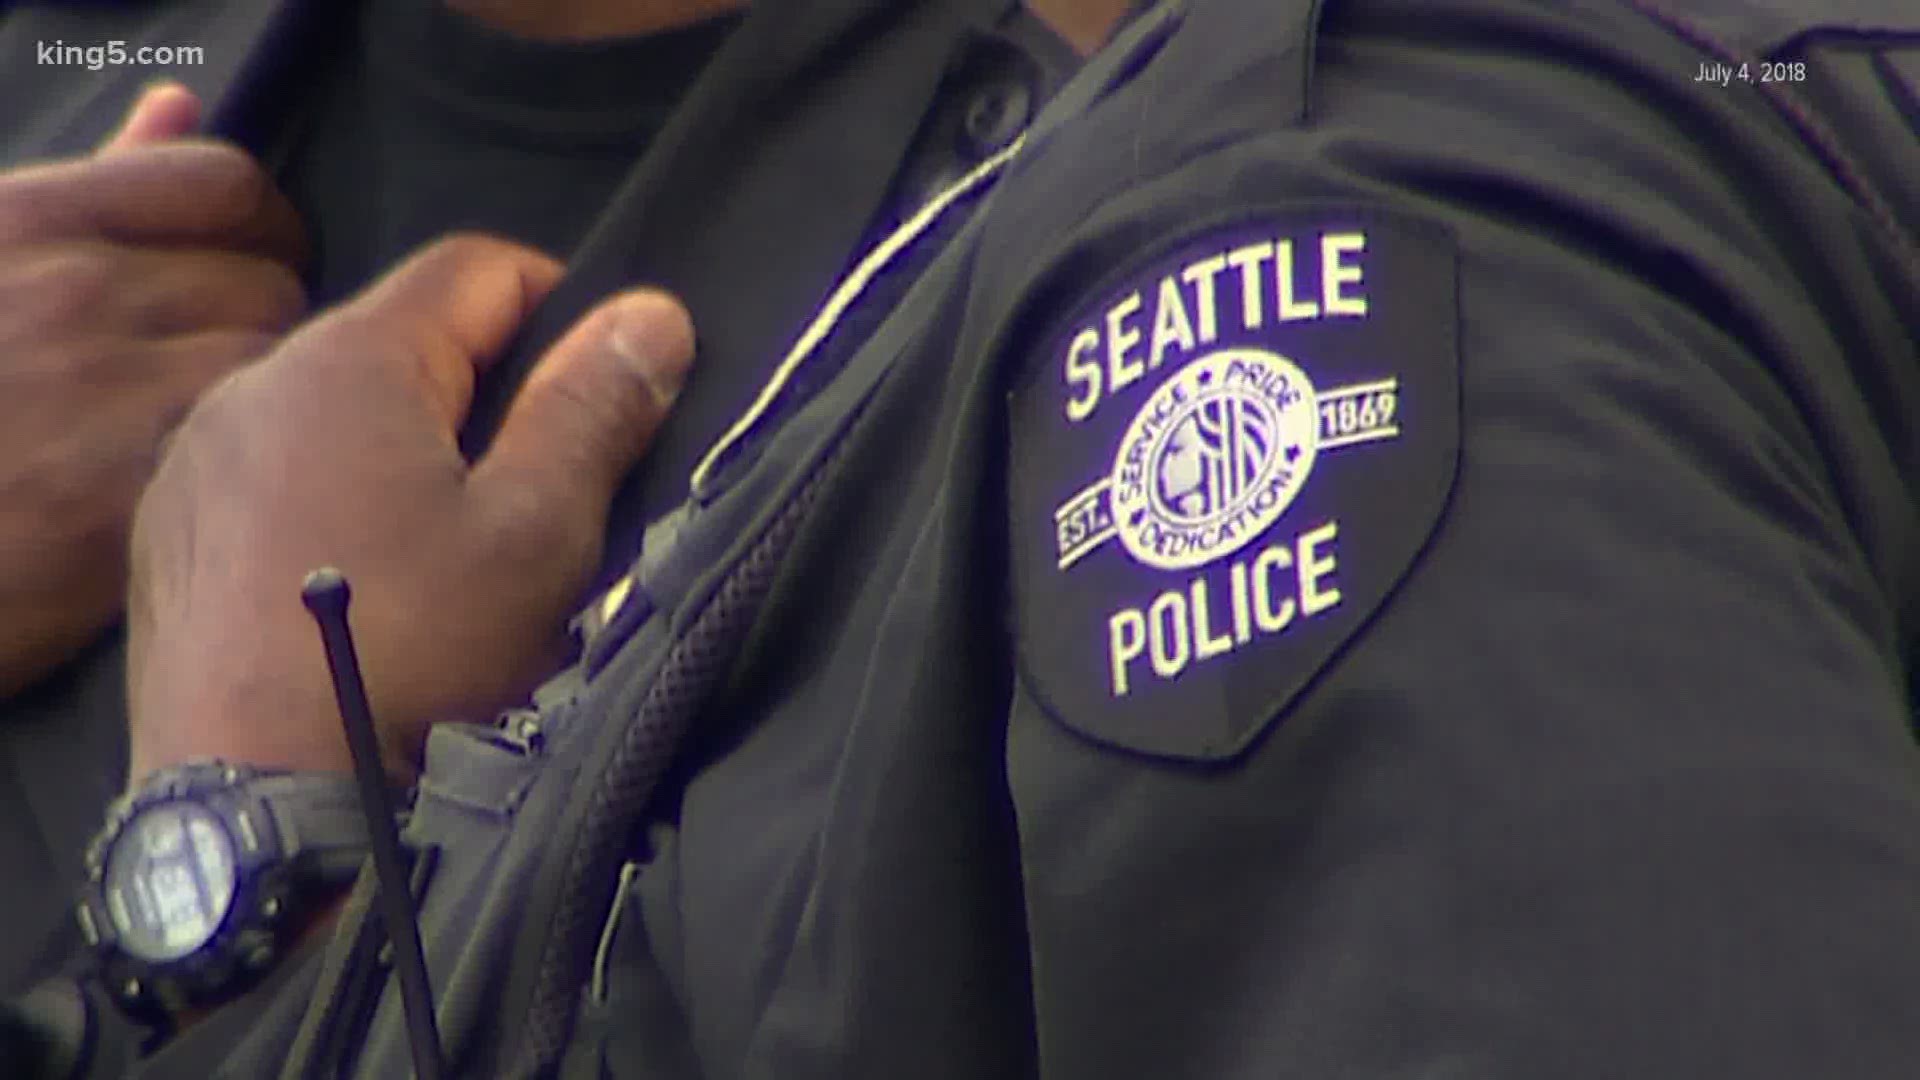 Seattle Police Department officers are now prohibited from using neck holds or carotid restraints in all circumstances.